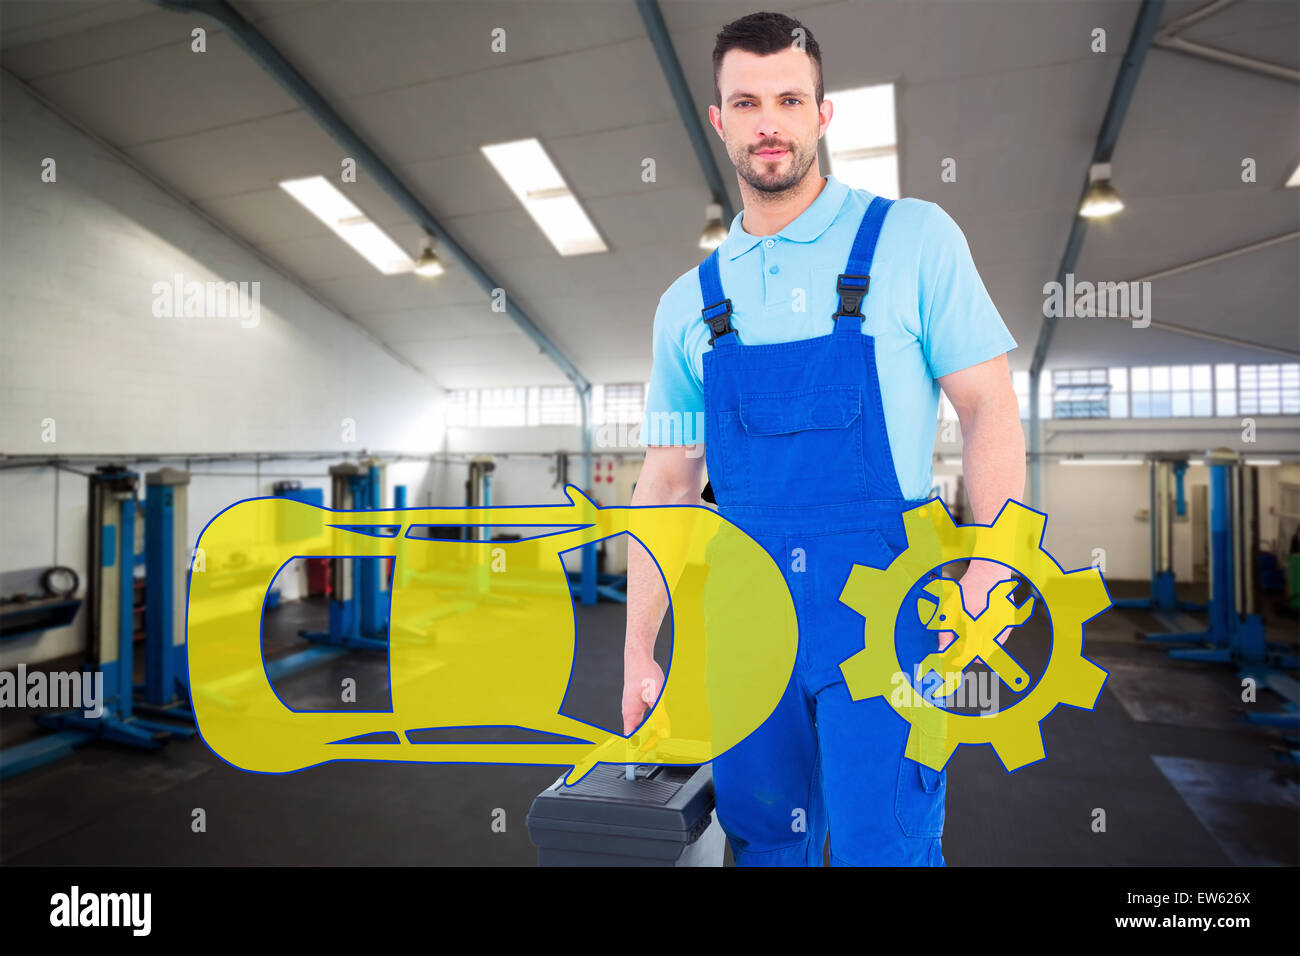 Composite image of repairman with toolbox Stock Photo